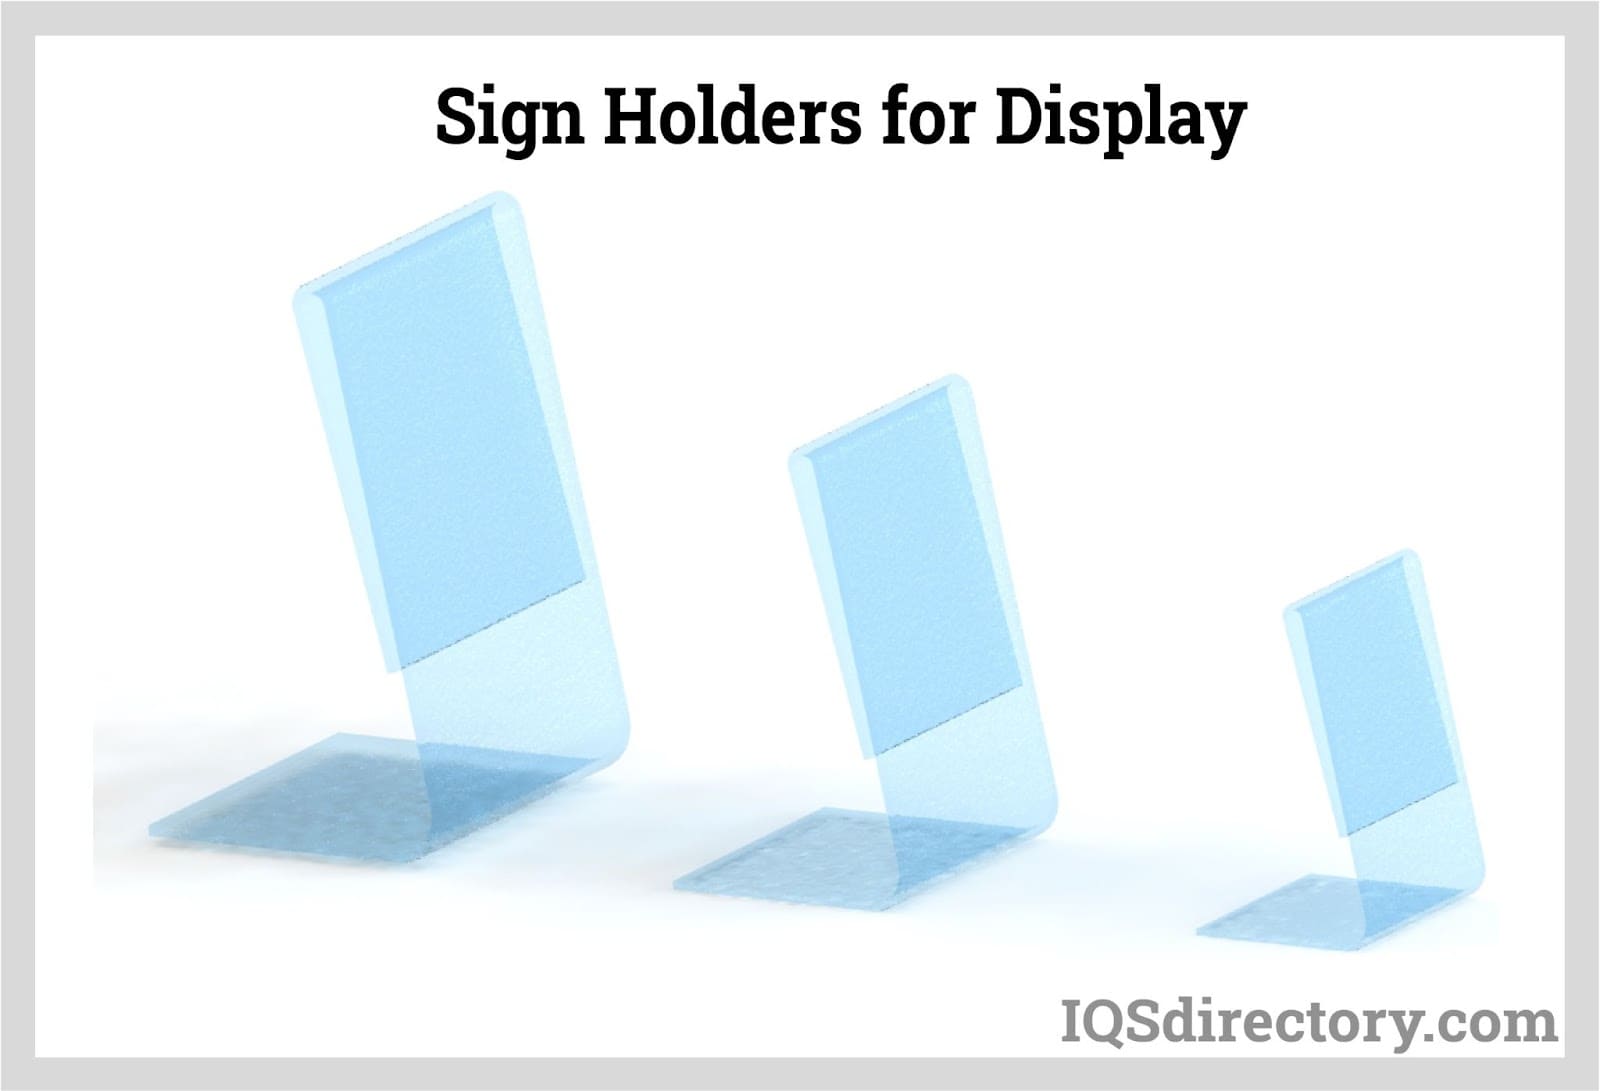 Sign Holders for Display